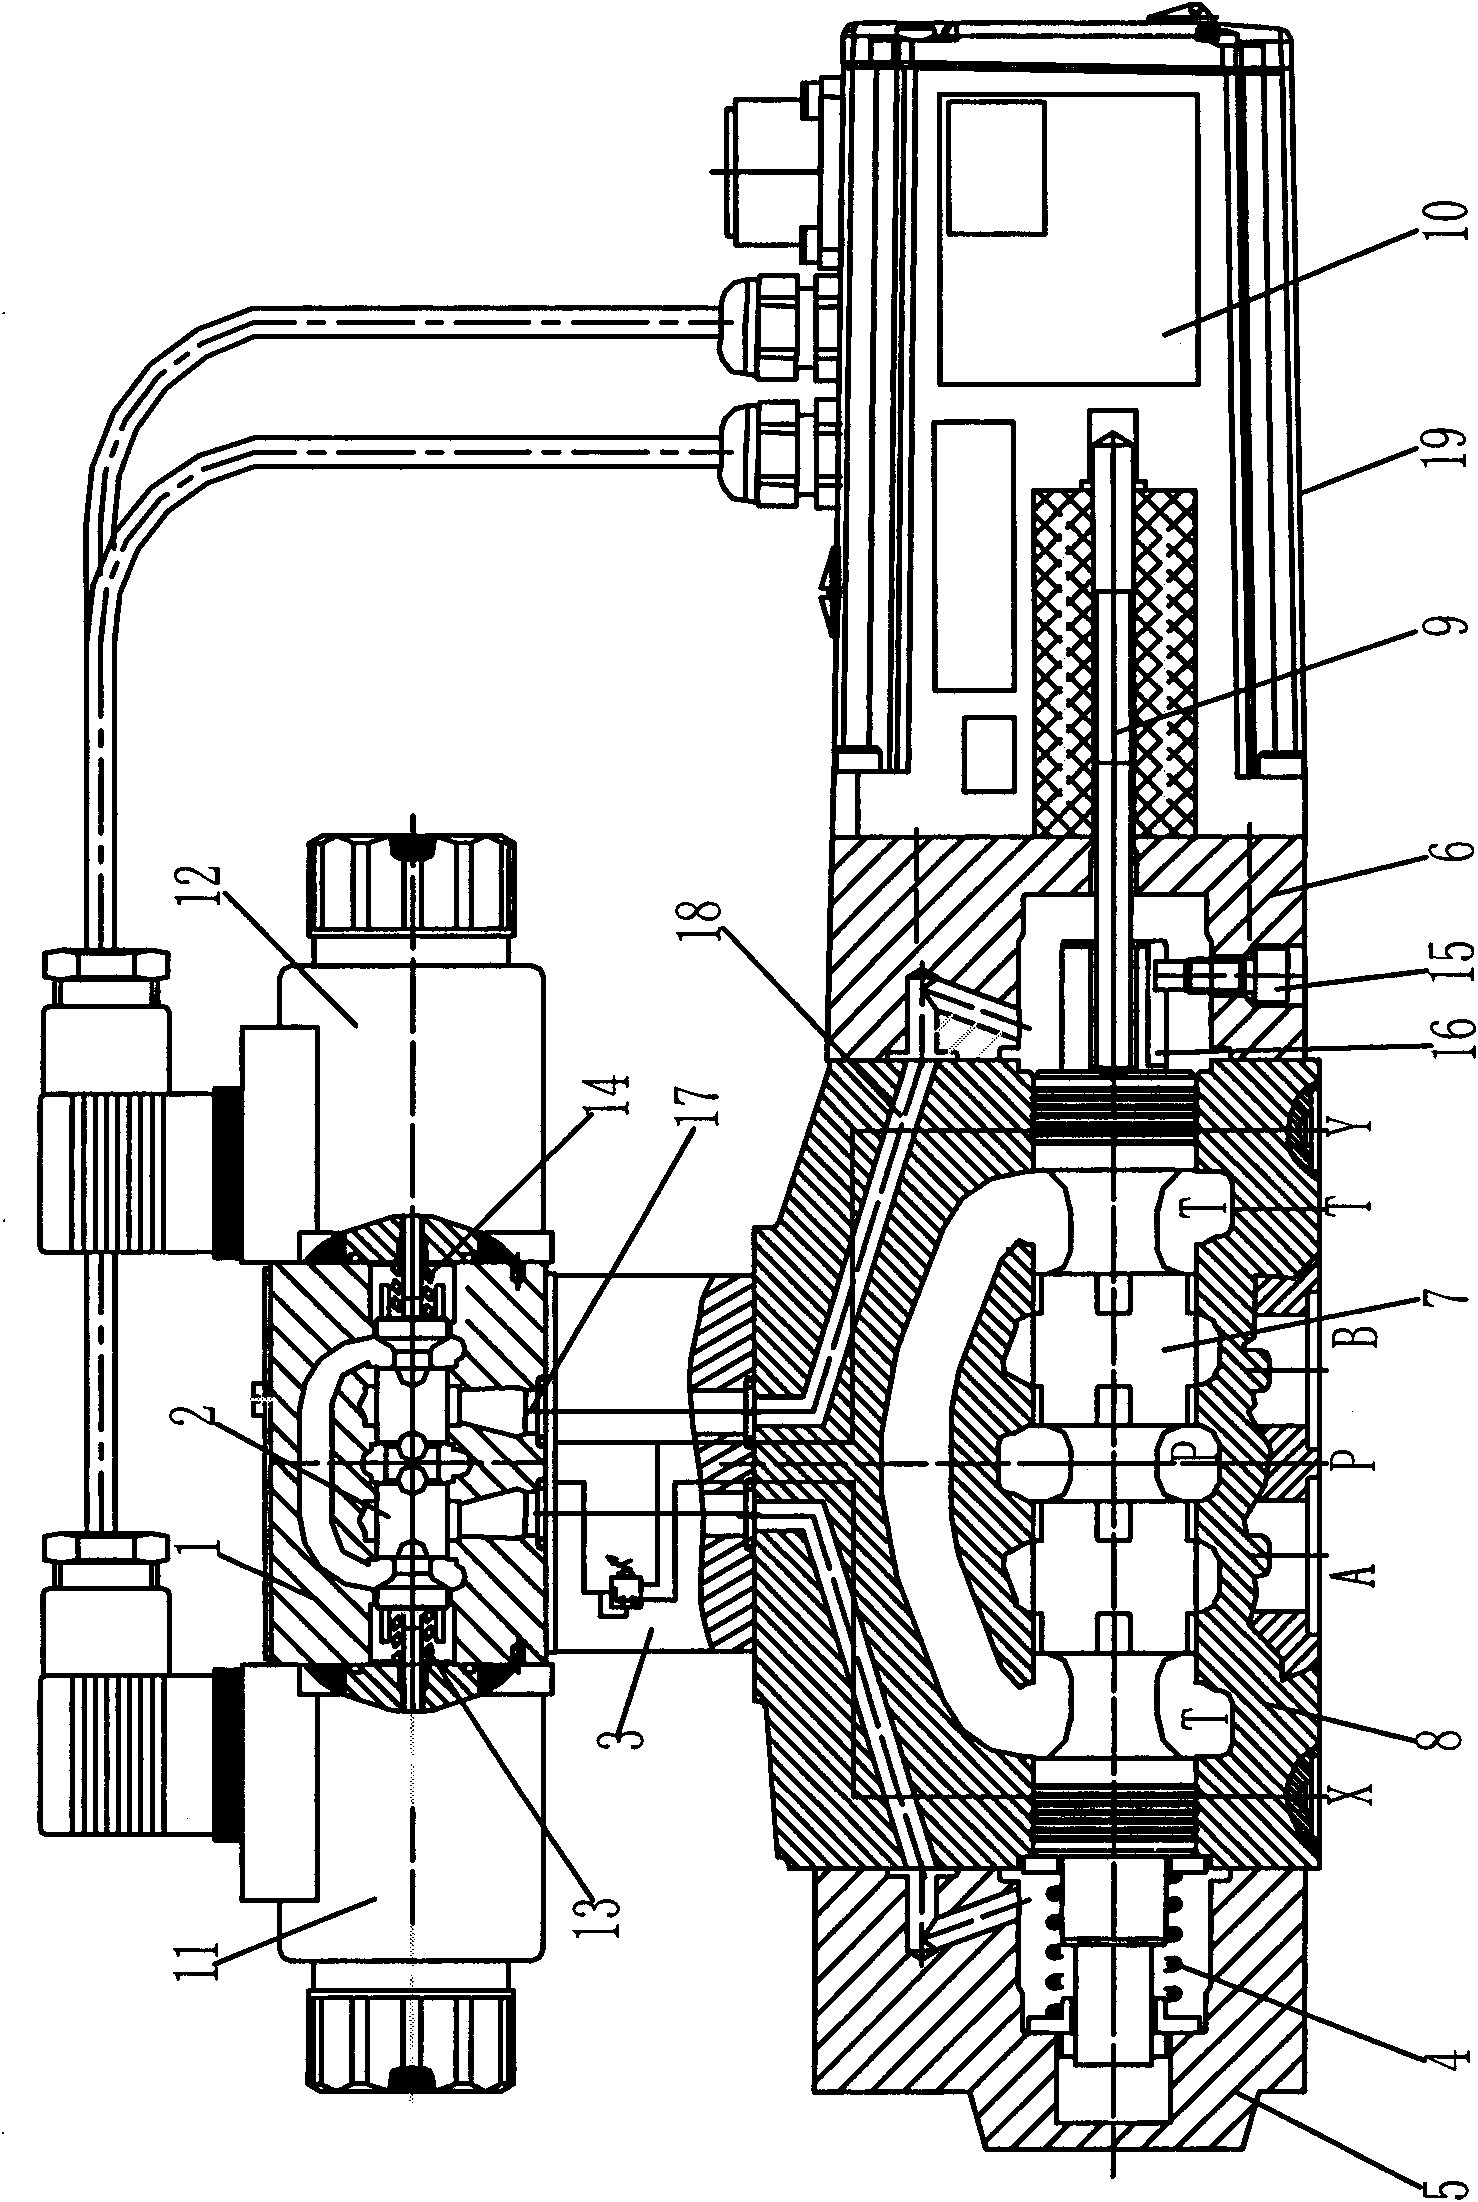 Pilot-operated electrical feedback proportional direction valve